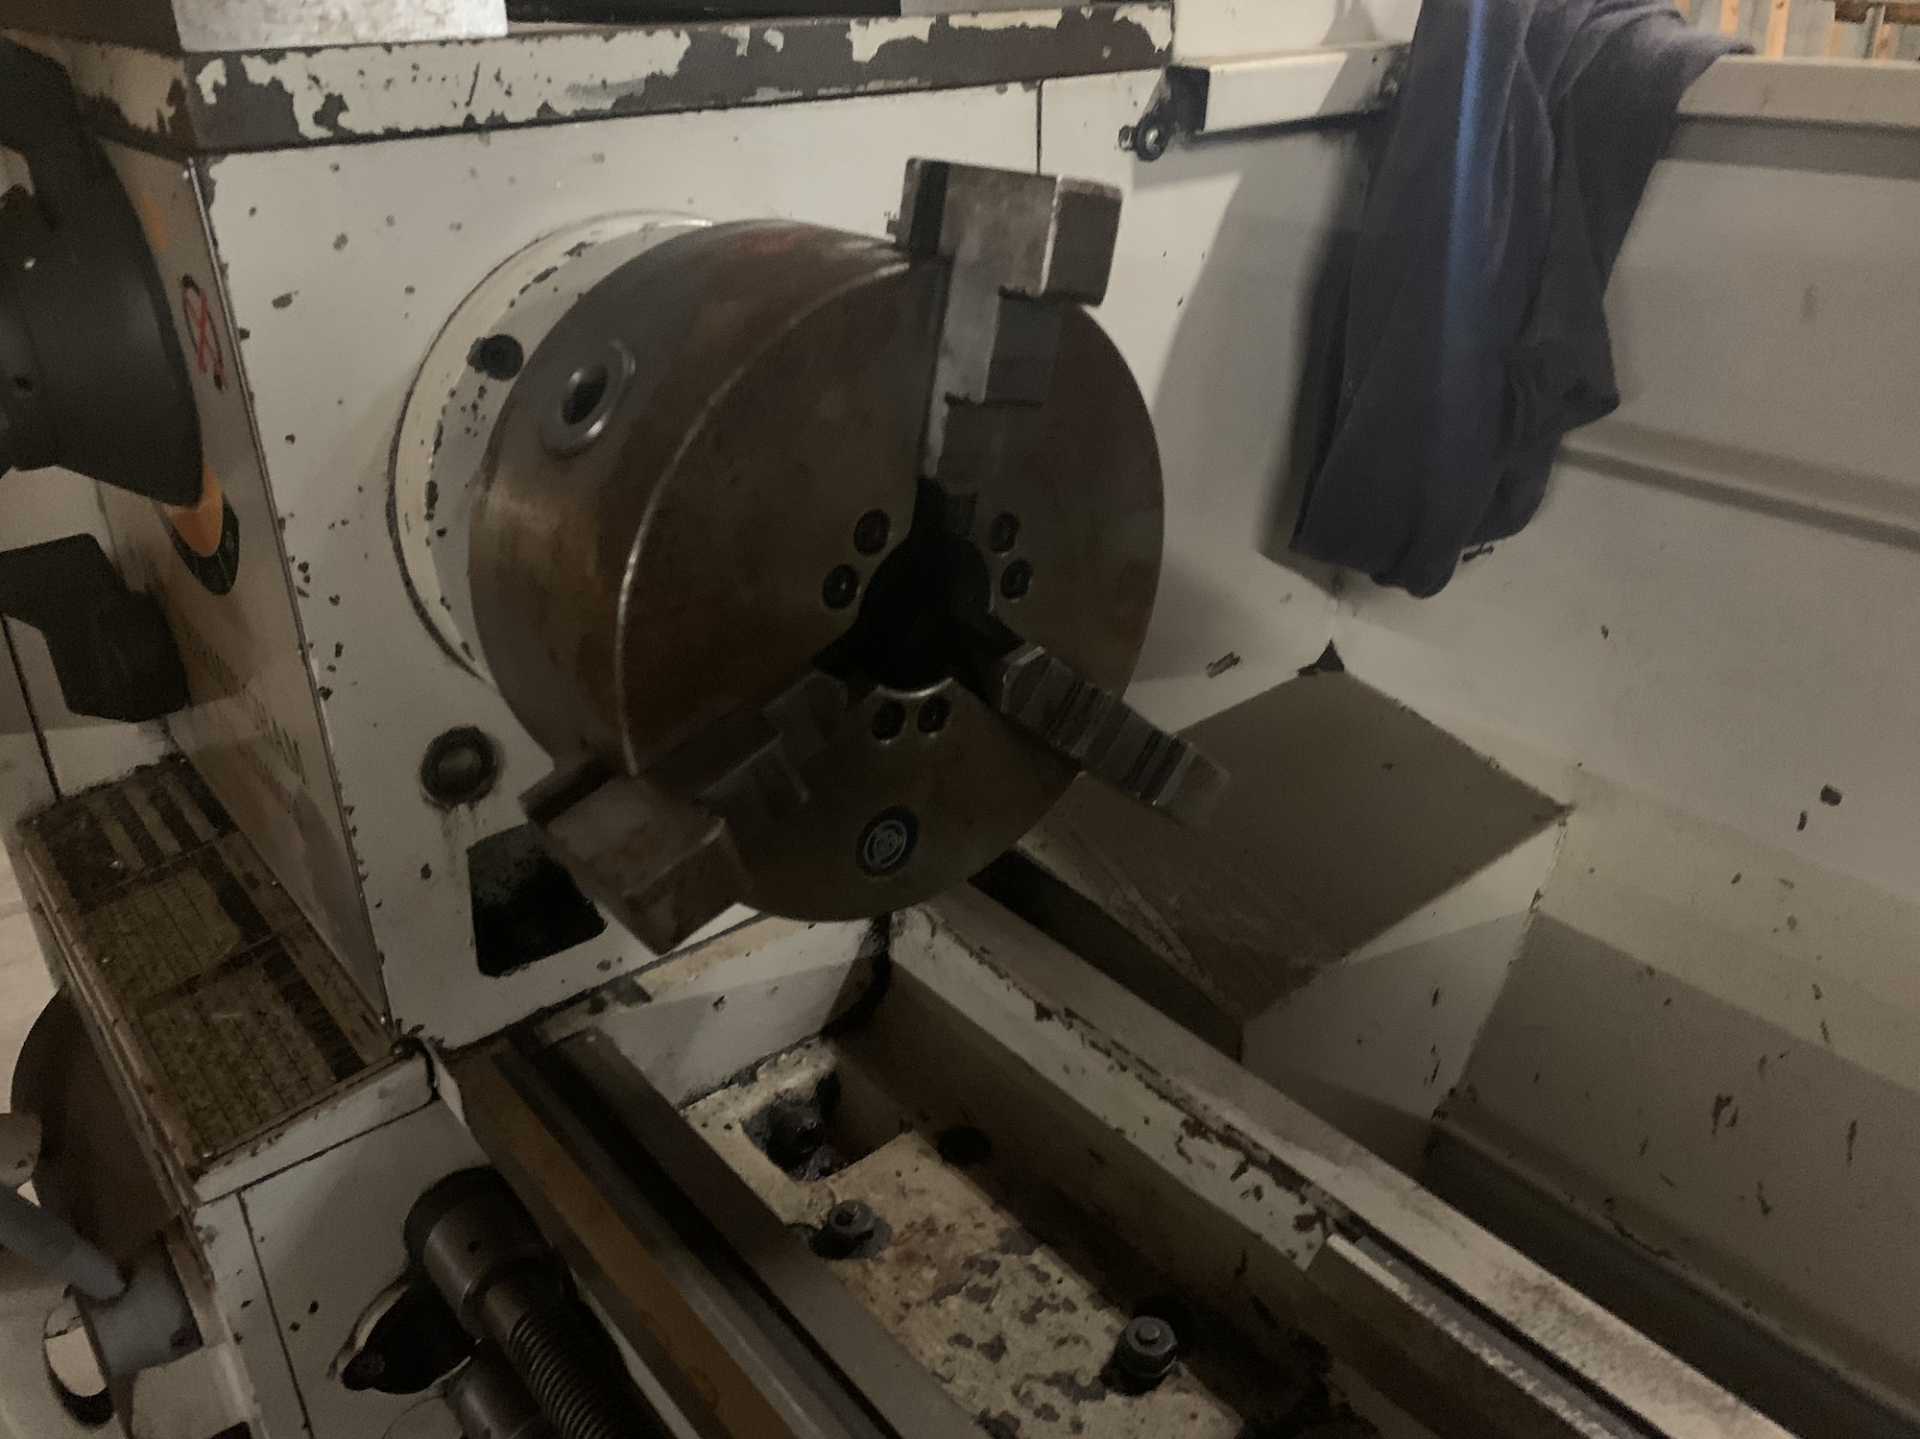 Birmingham YCL-1340H Lathe, Swing: 13", Centers: 40", 8 Speed: 70-2000 RPM, Year: 2011 - Image 2 of 4